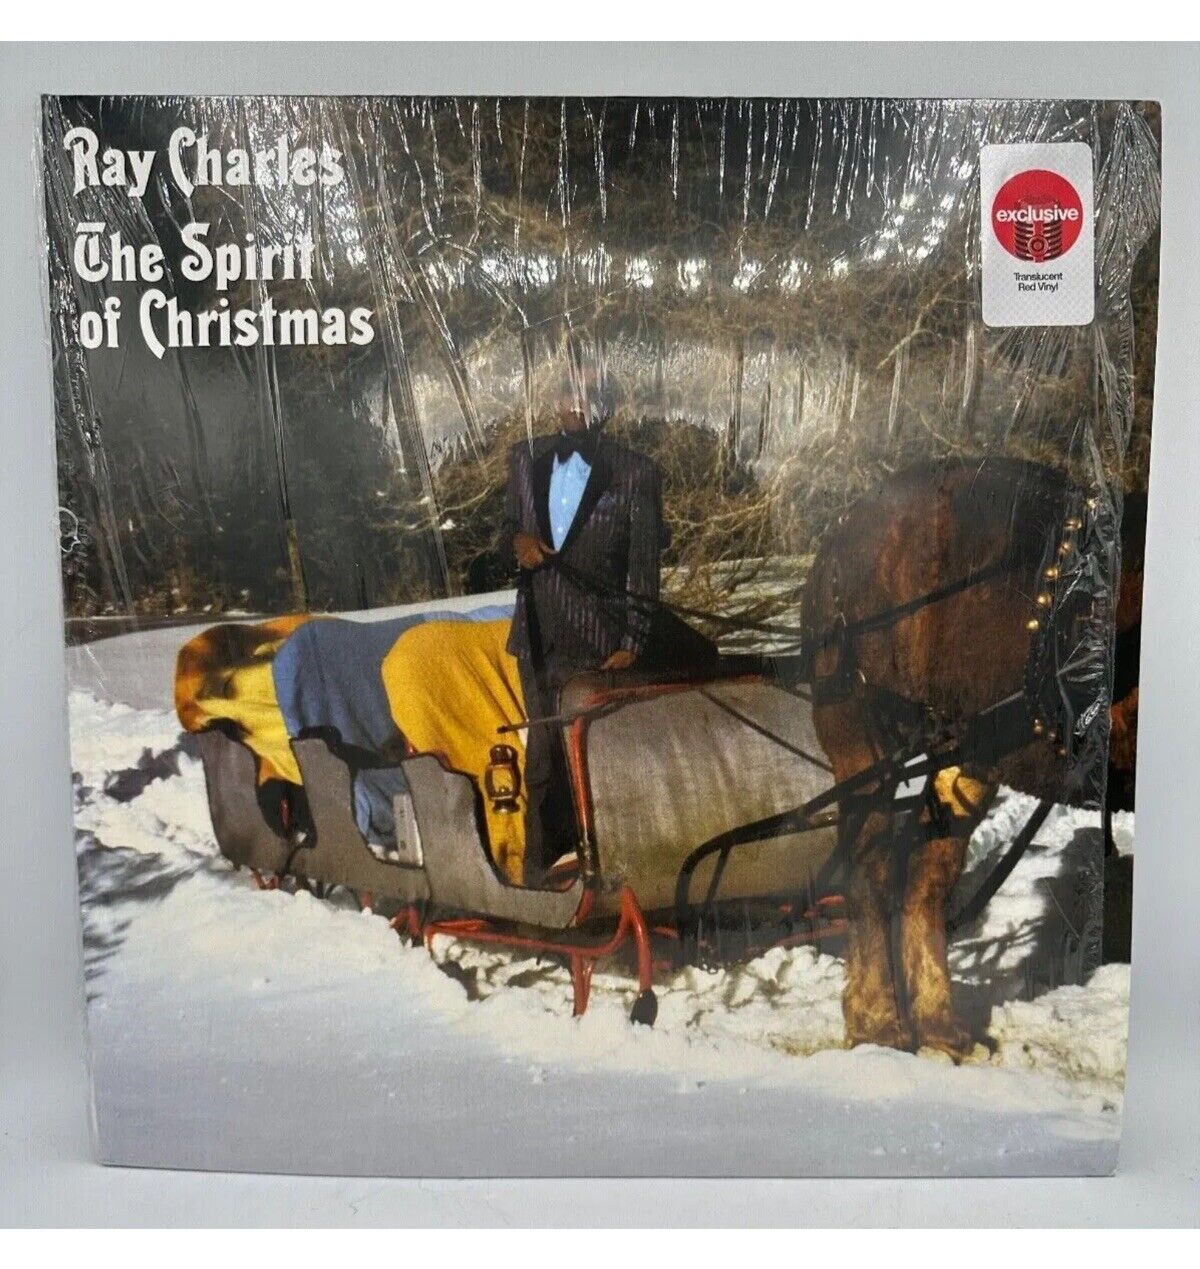 Ray Charles The Spirit of Christmas Translucent Red Vinyl LP Exclusive